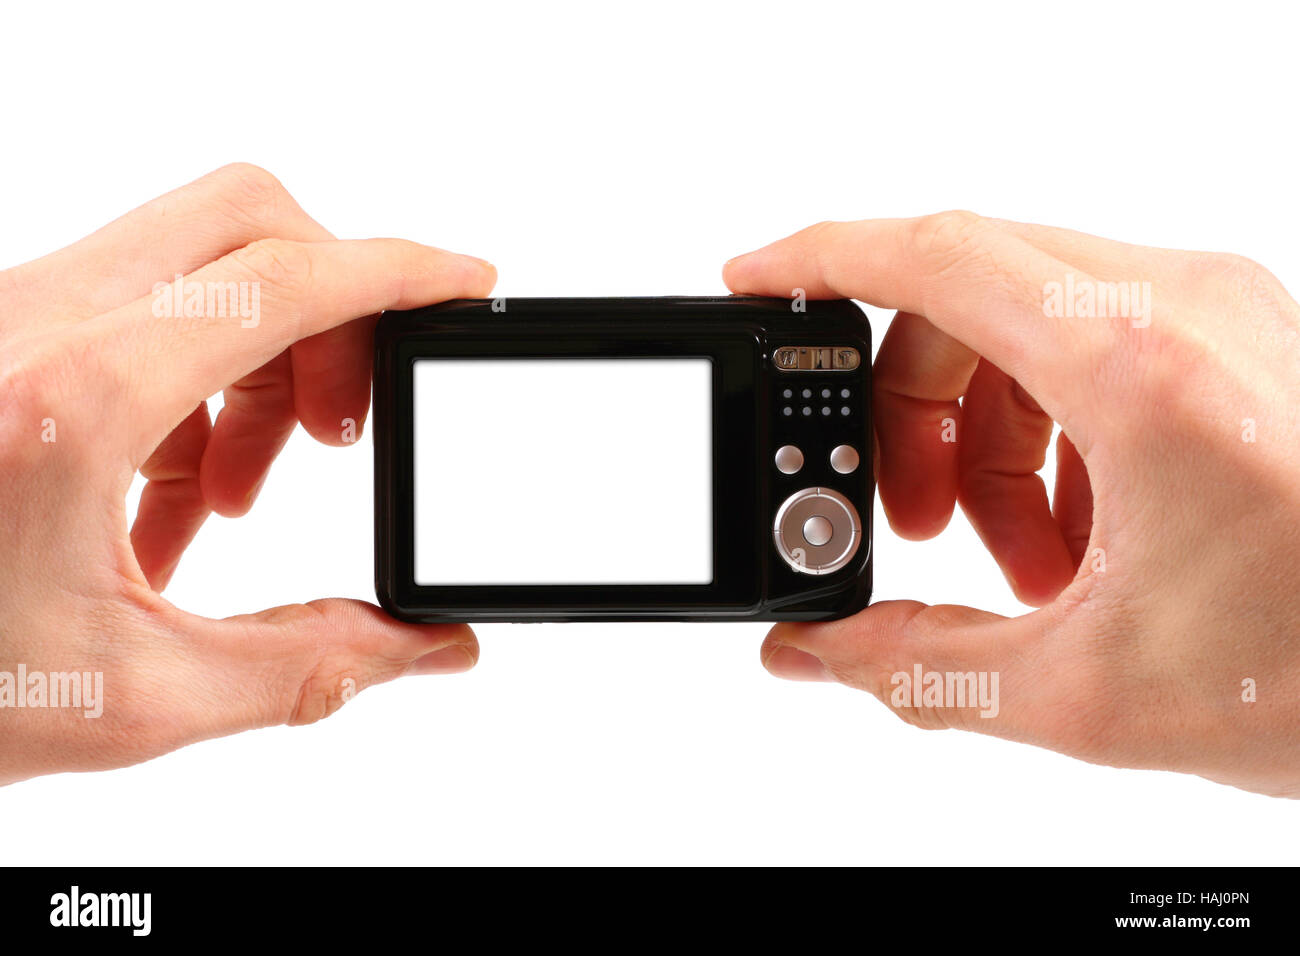 photo camera in hands isolated on white background Stock Photo